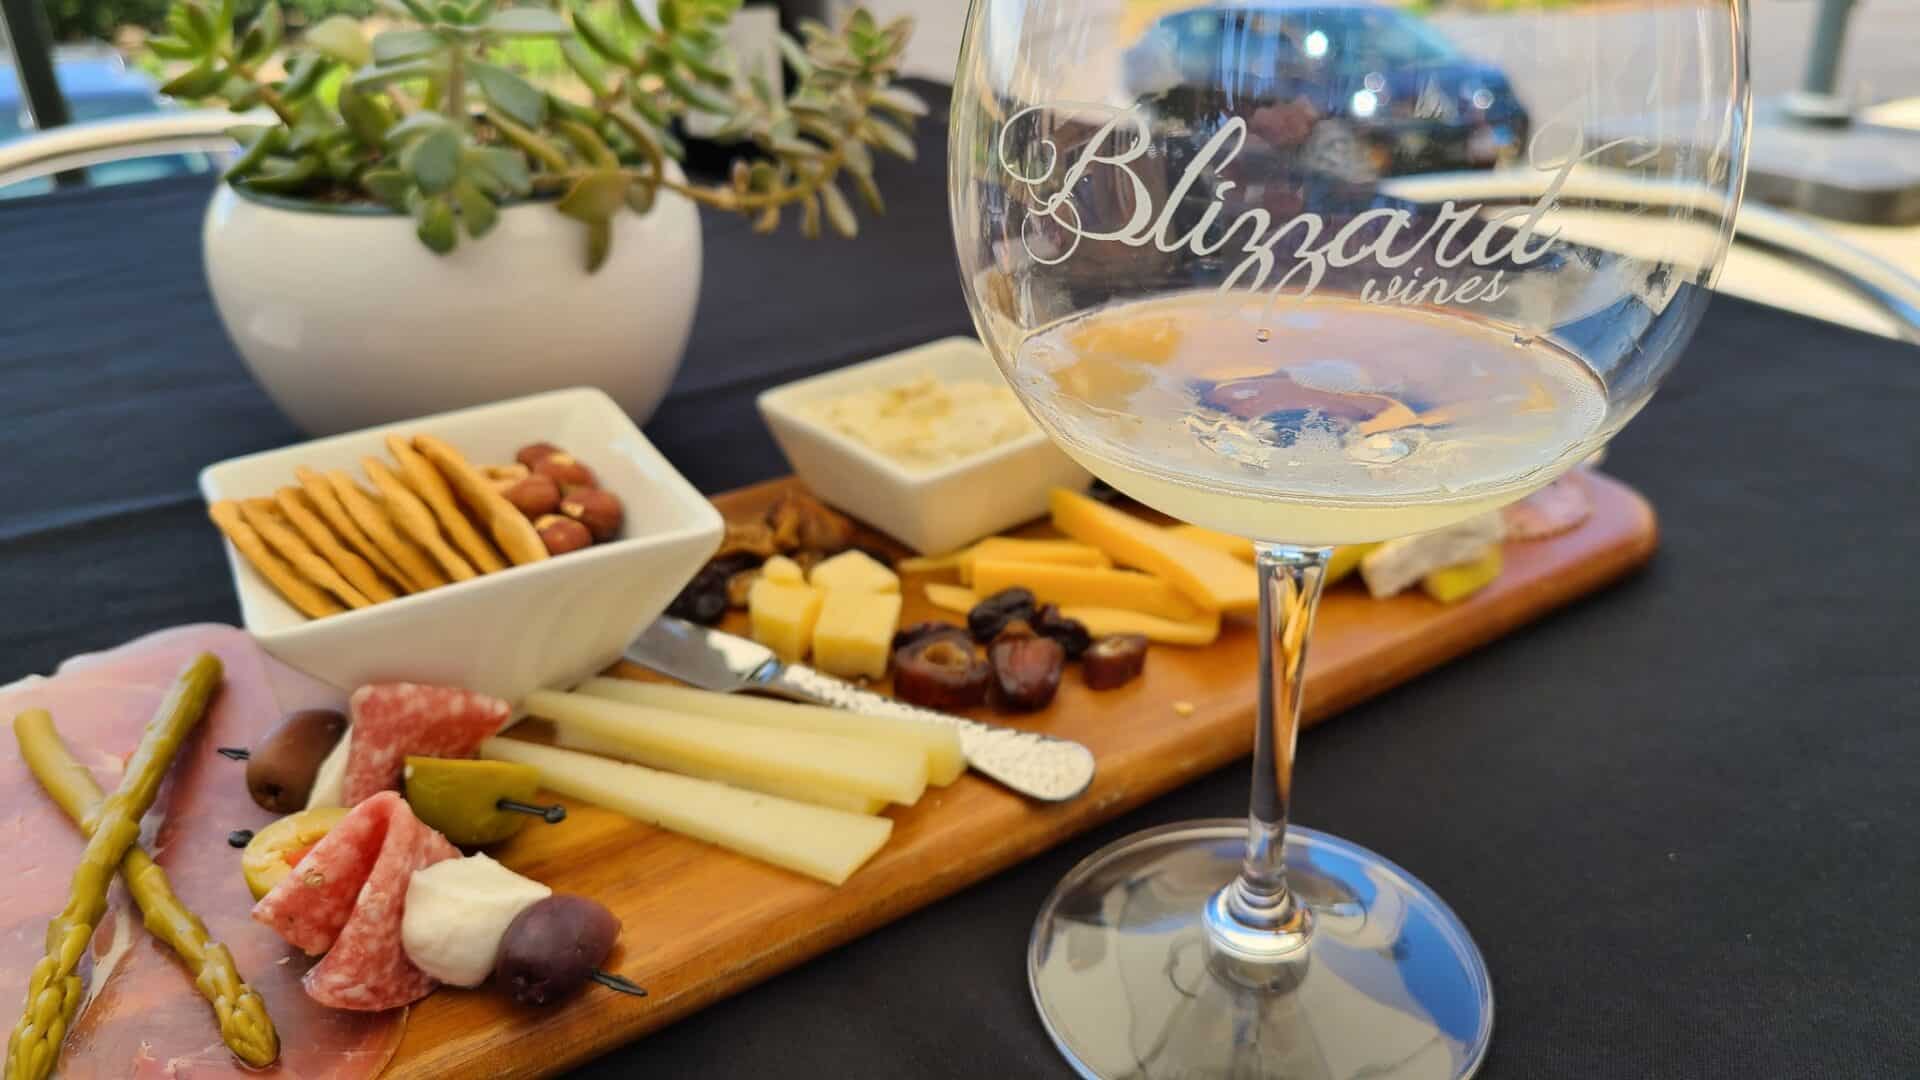 boottle of Blizzard awine nd cheese tasting board